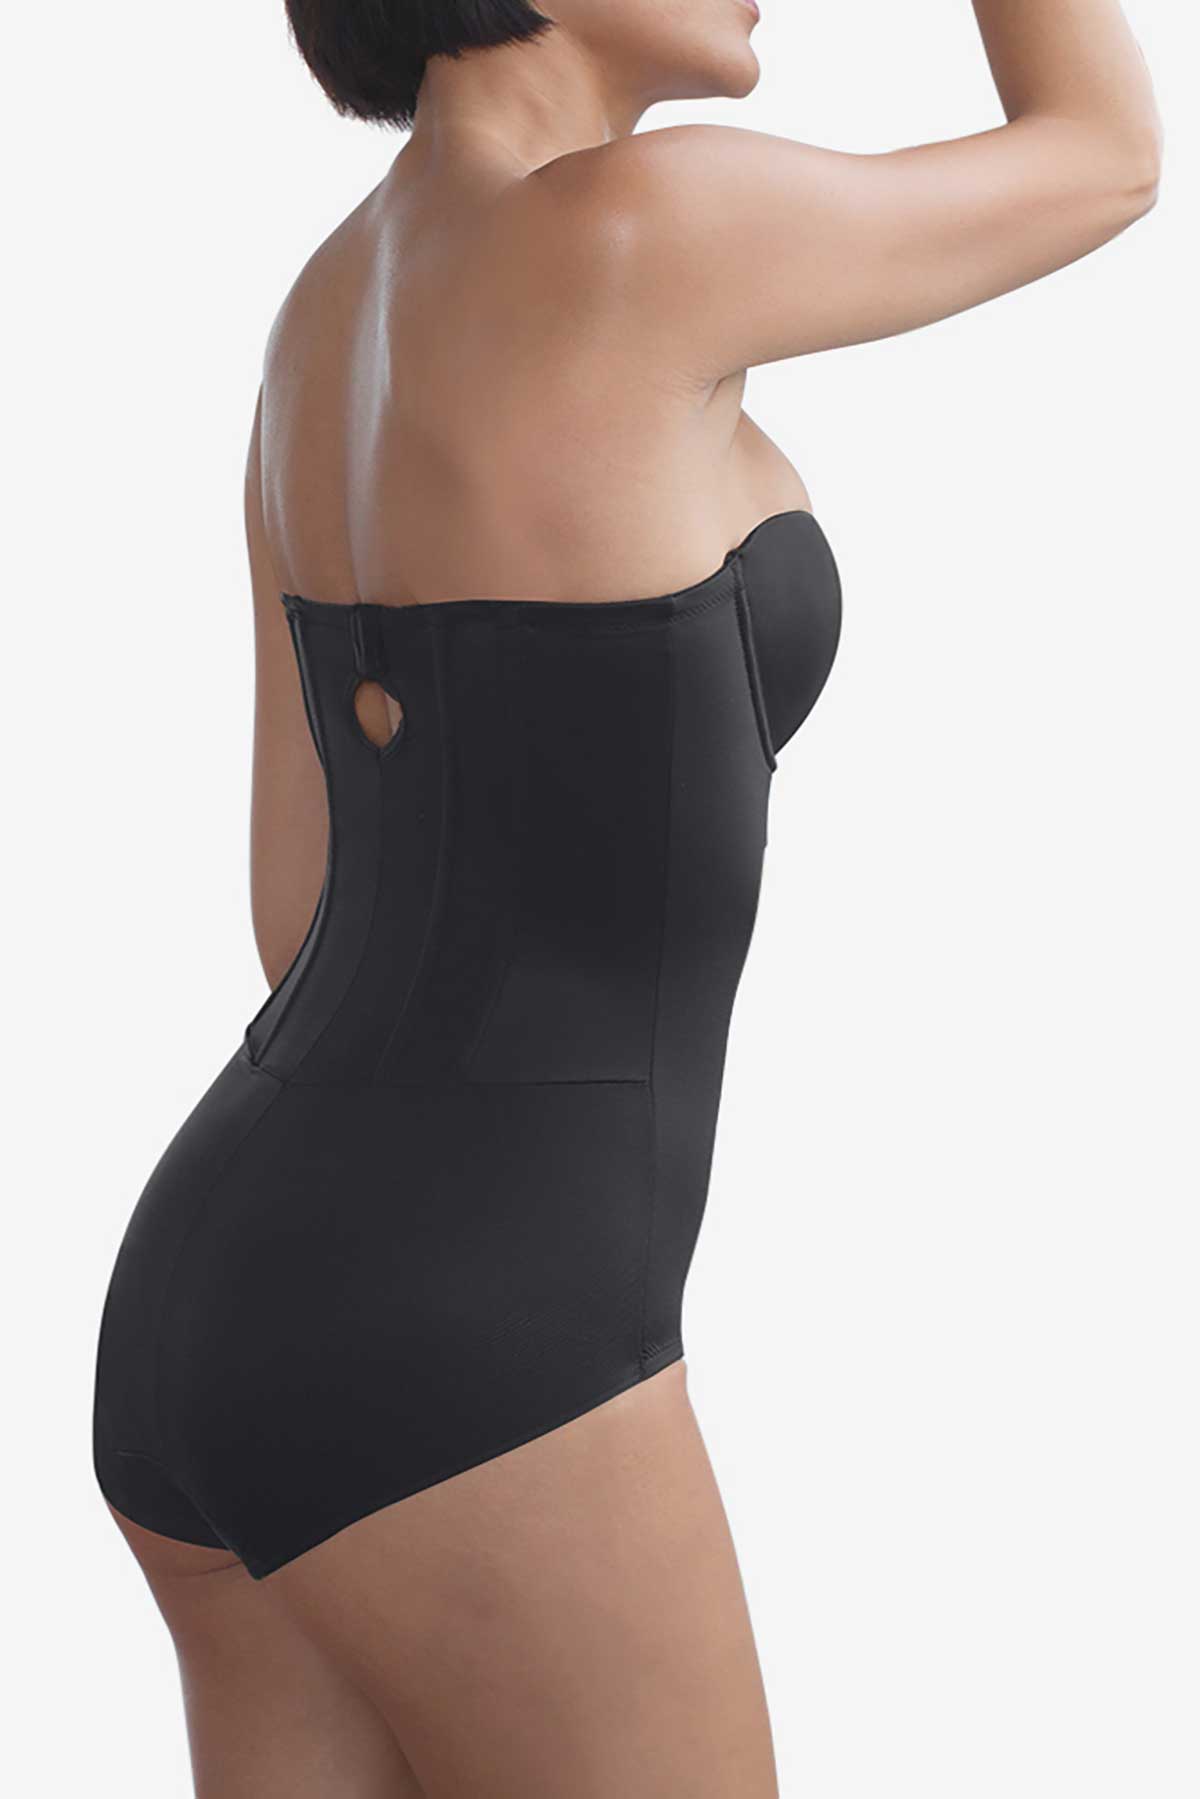 Miraclesuit Extra Firm Control Strapless Thigh Slimming Body Shaper 2791 in  Natural